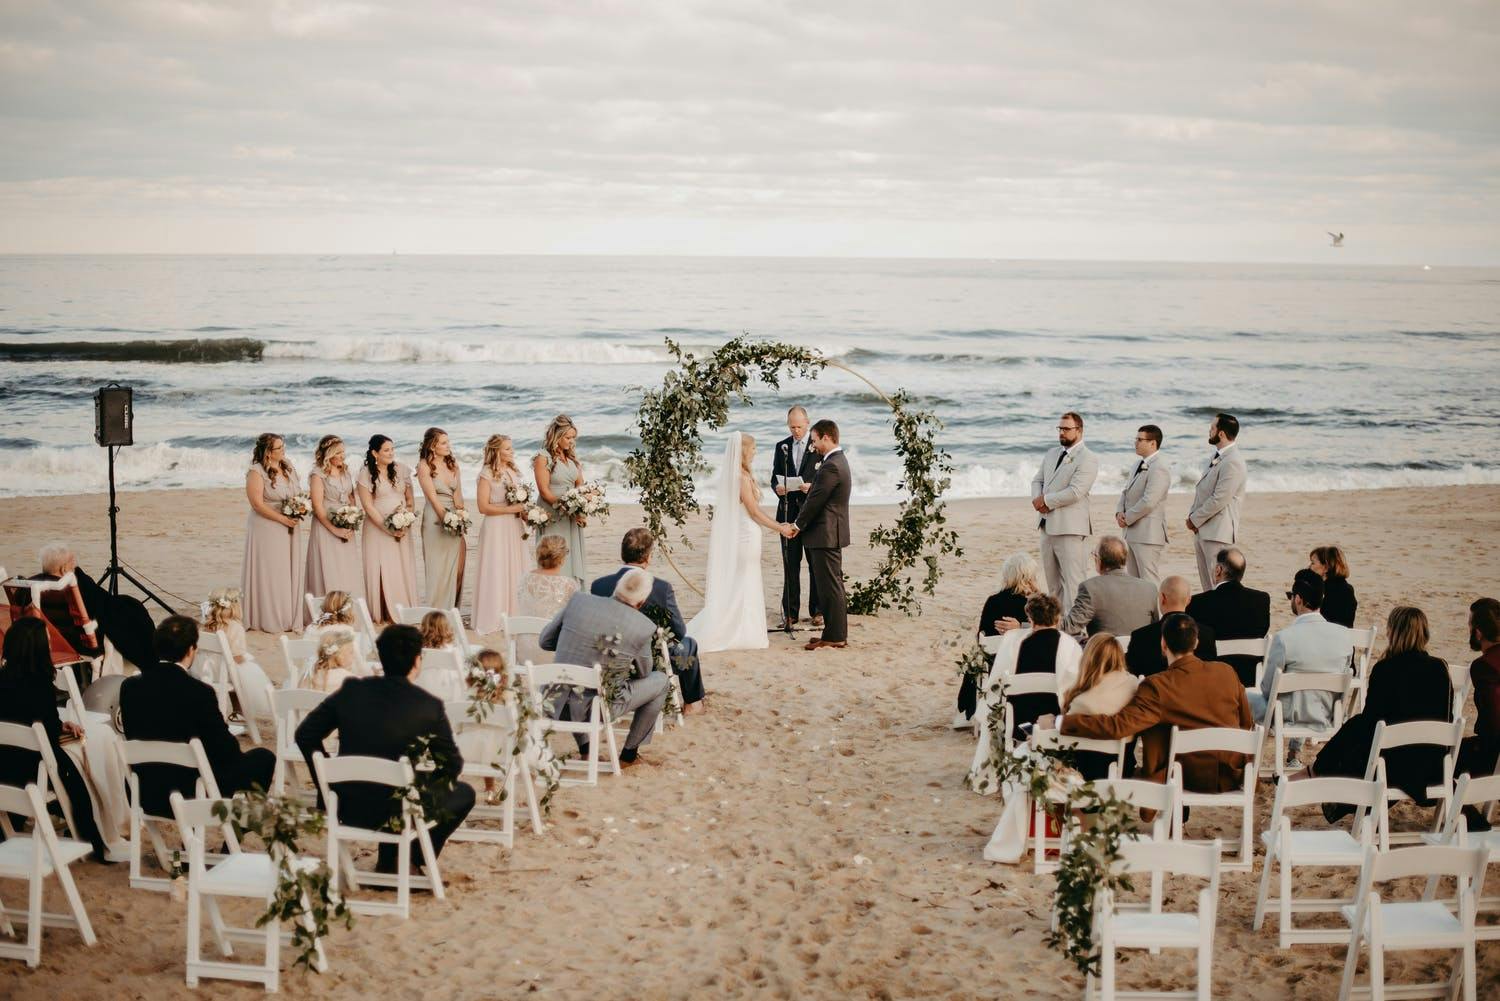 Beachfront wedding ceremony with circular arch covered in greenery | PartySlate